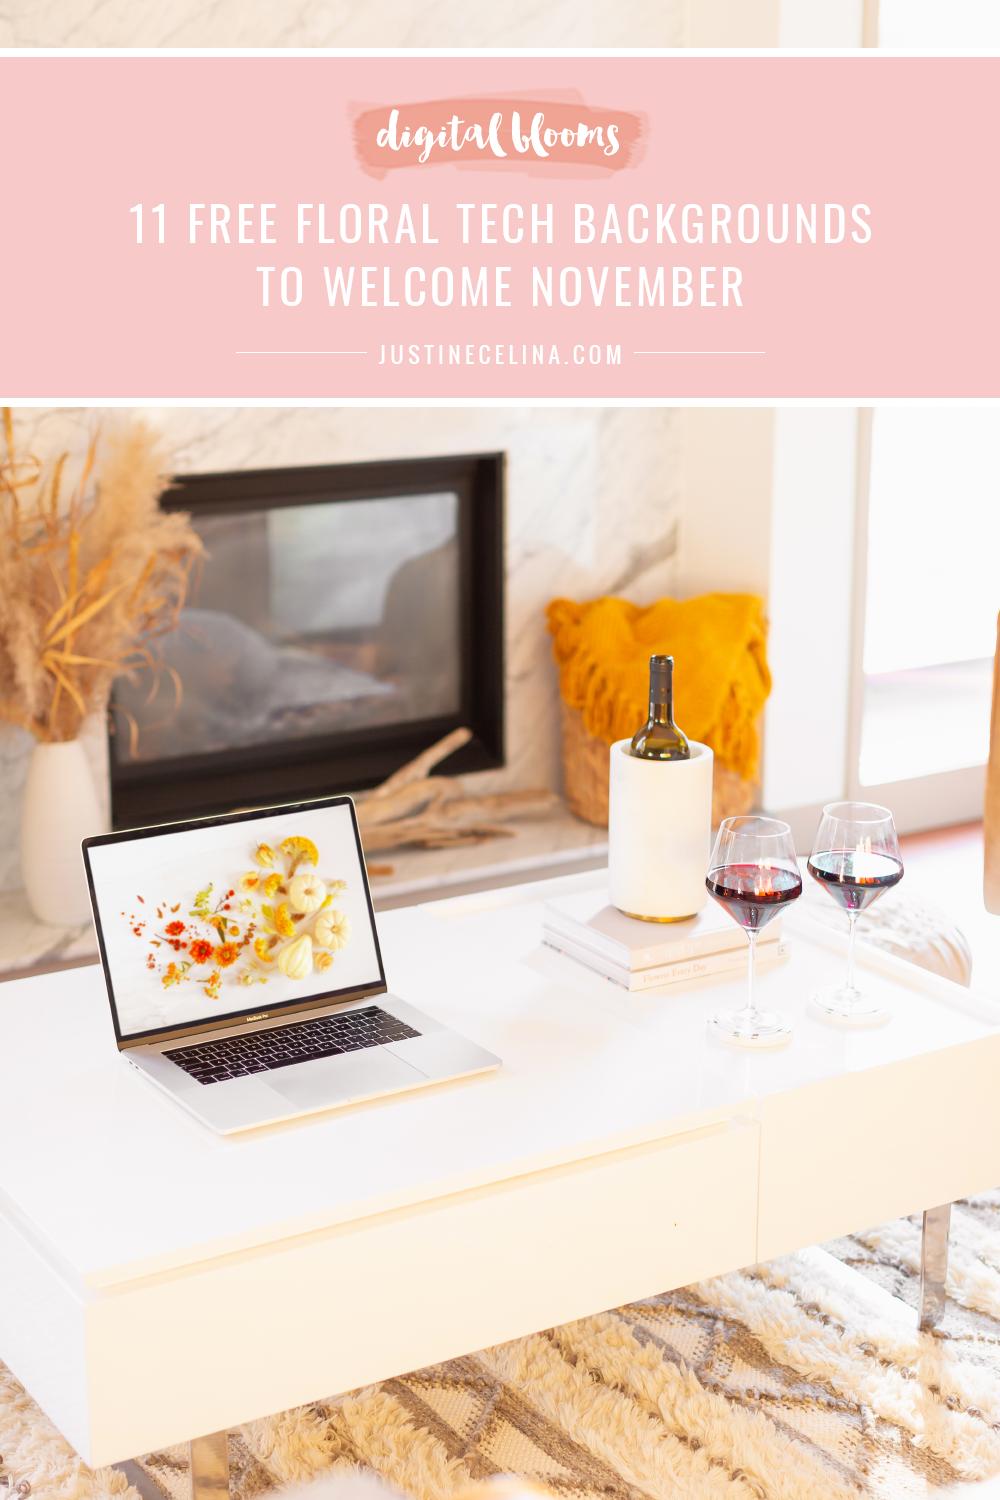 DIGITAL BLOOMS NOVEMBER 2021 | 11 Free Floral Tech Backgrounds to Welcome November | A cozy bohemian Living Room with a marble fireplace and white coffee table with a MacBook Pro featuring JustineCelina’s November Digital Blooms floral and pumpkin tech wallpaper and two glass of red wine | Female Entrepreneur Digital Wallpapers | The Best of Justine Celina’s Fall Digital Blooms | Fall Flower Desktop Wallpaper | Calgary Creative Lifestyle Blogger // JustineCelina.com